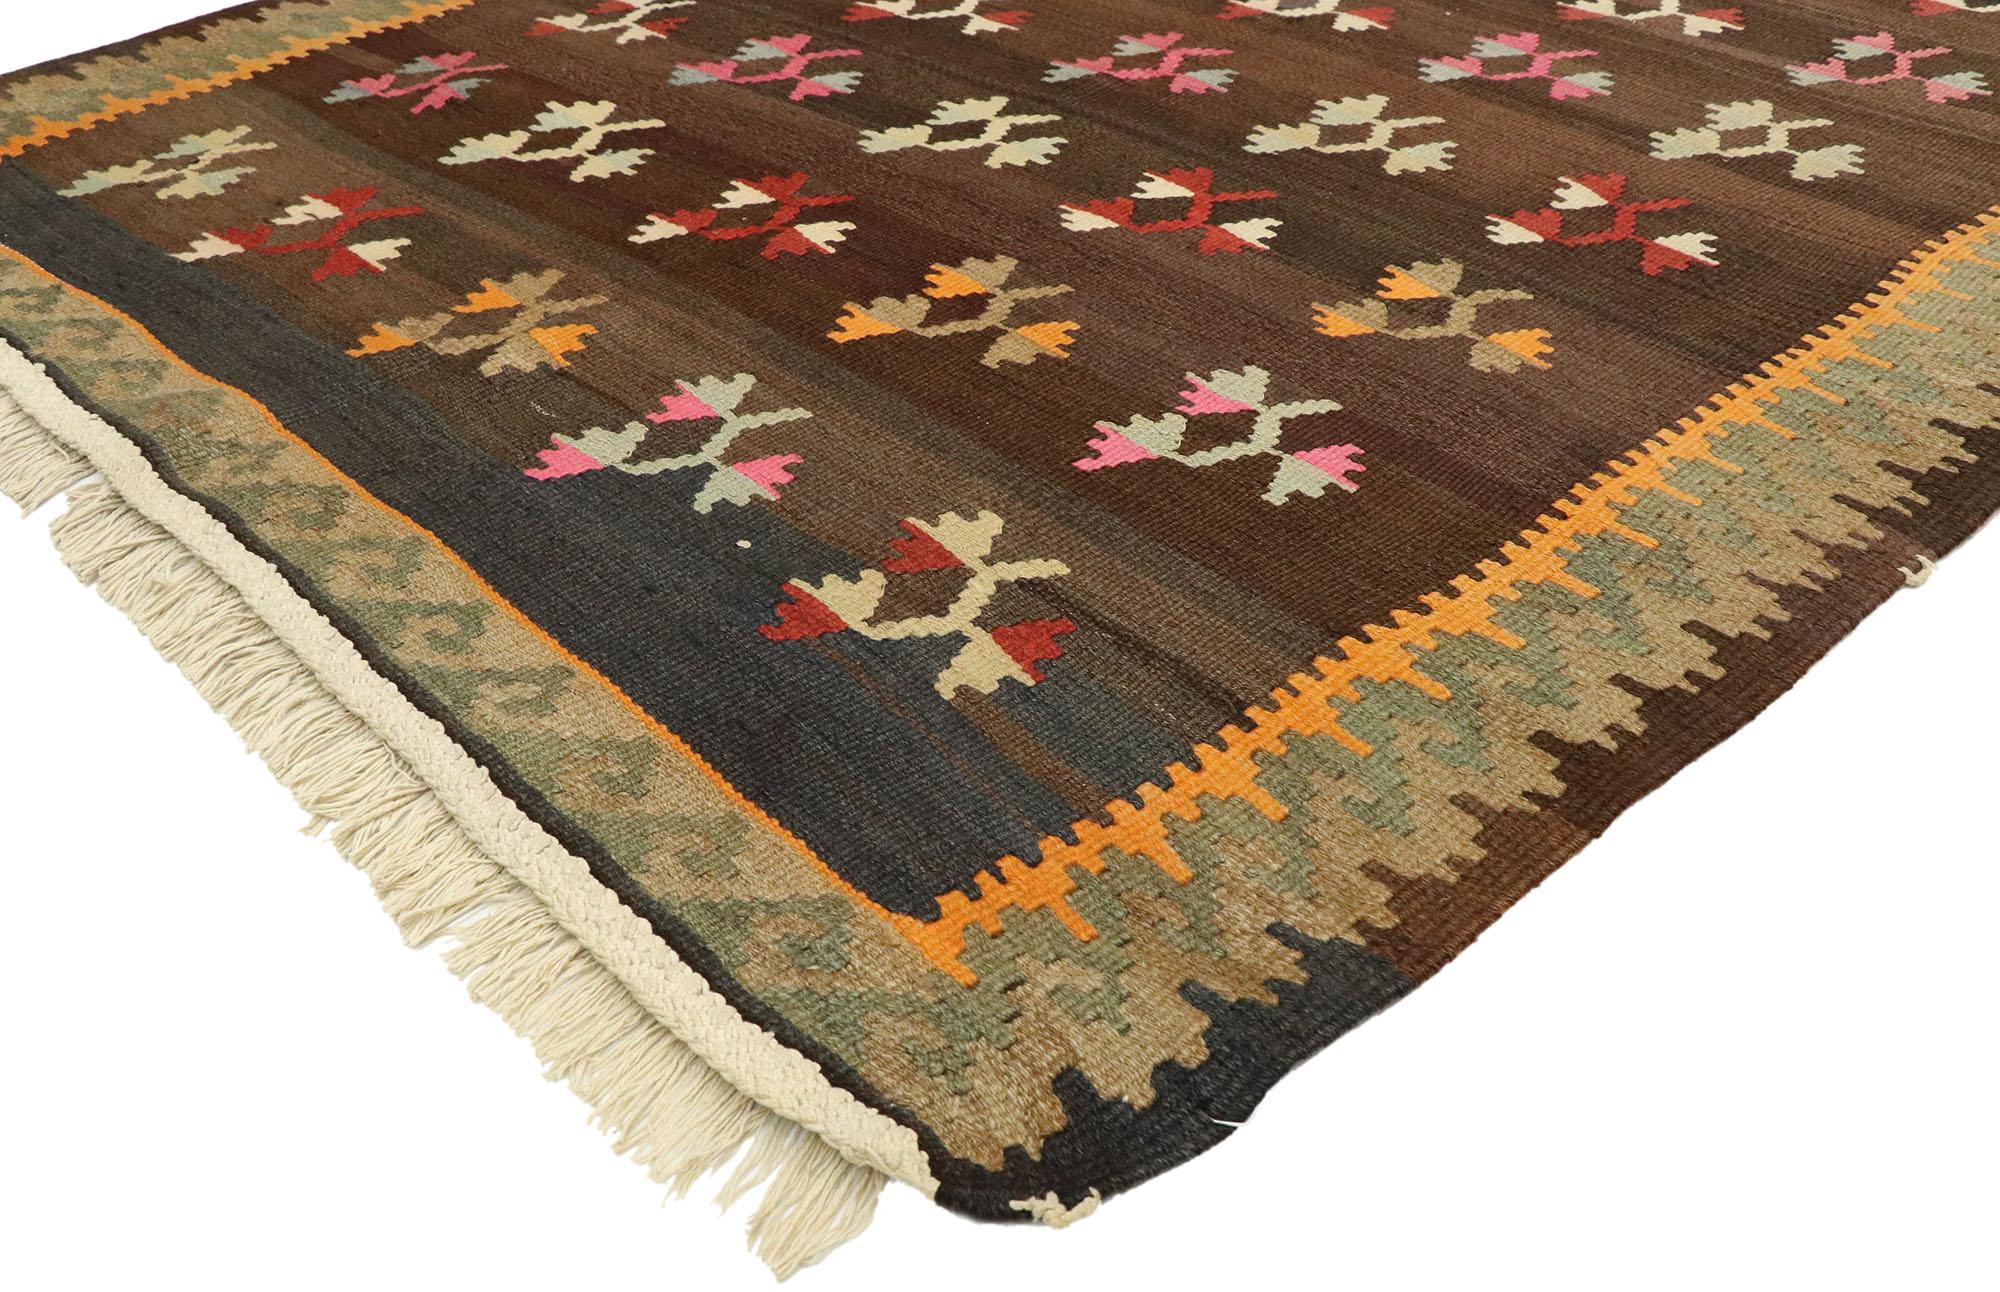 70293, vintage flat-weave Turkish Floral Kilim rug with boho farmhouse style. Bright and versatile, this handwoven wool vintage Turkish floral Kilim rug beautifully embodies a boho farmhouse style. The abrashed dark brown abrashed field features an